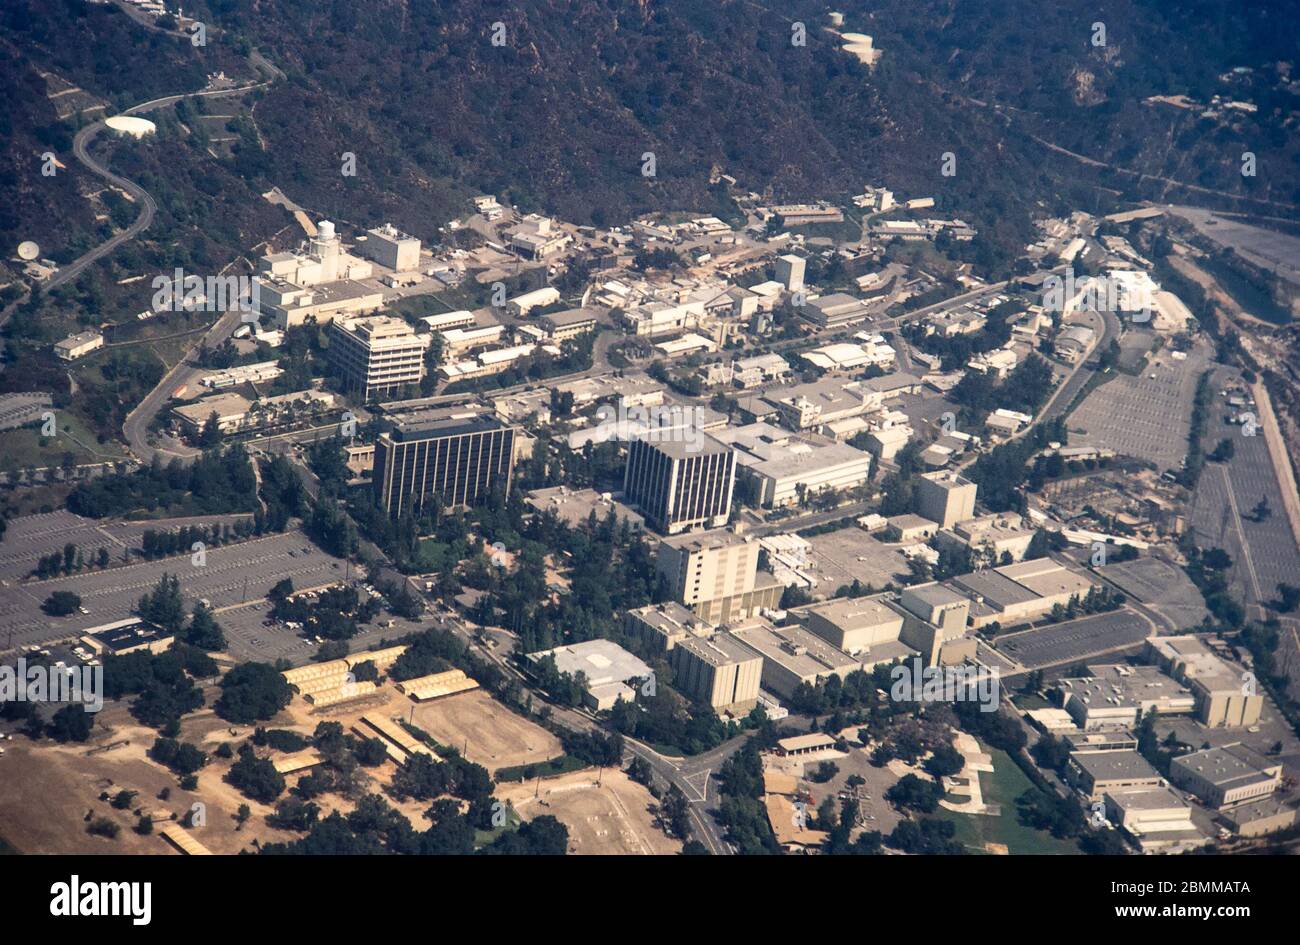 Pasadena, Los Angeles, California, USA - Feb 1984: Aerial view of the Jet Propulsion Laboratory (JPL) in Pasadena, and surroundings.  Scanned 35mm film. Stock Photo